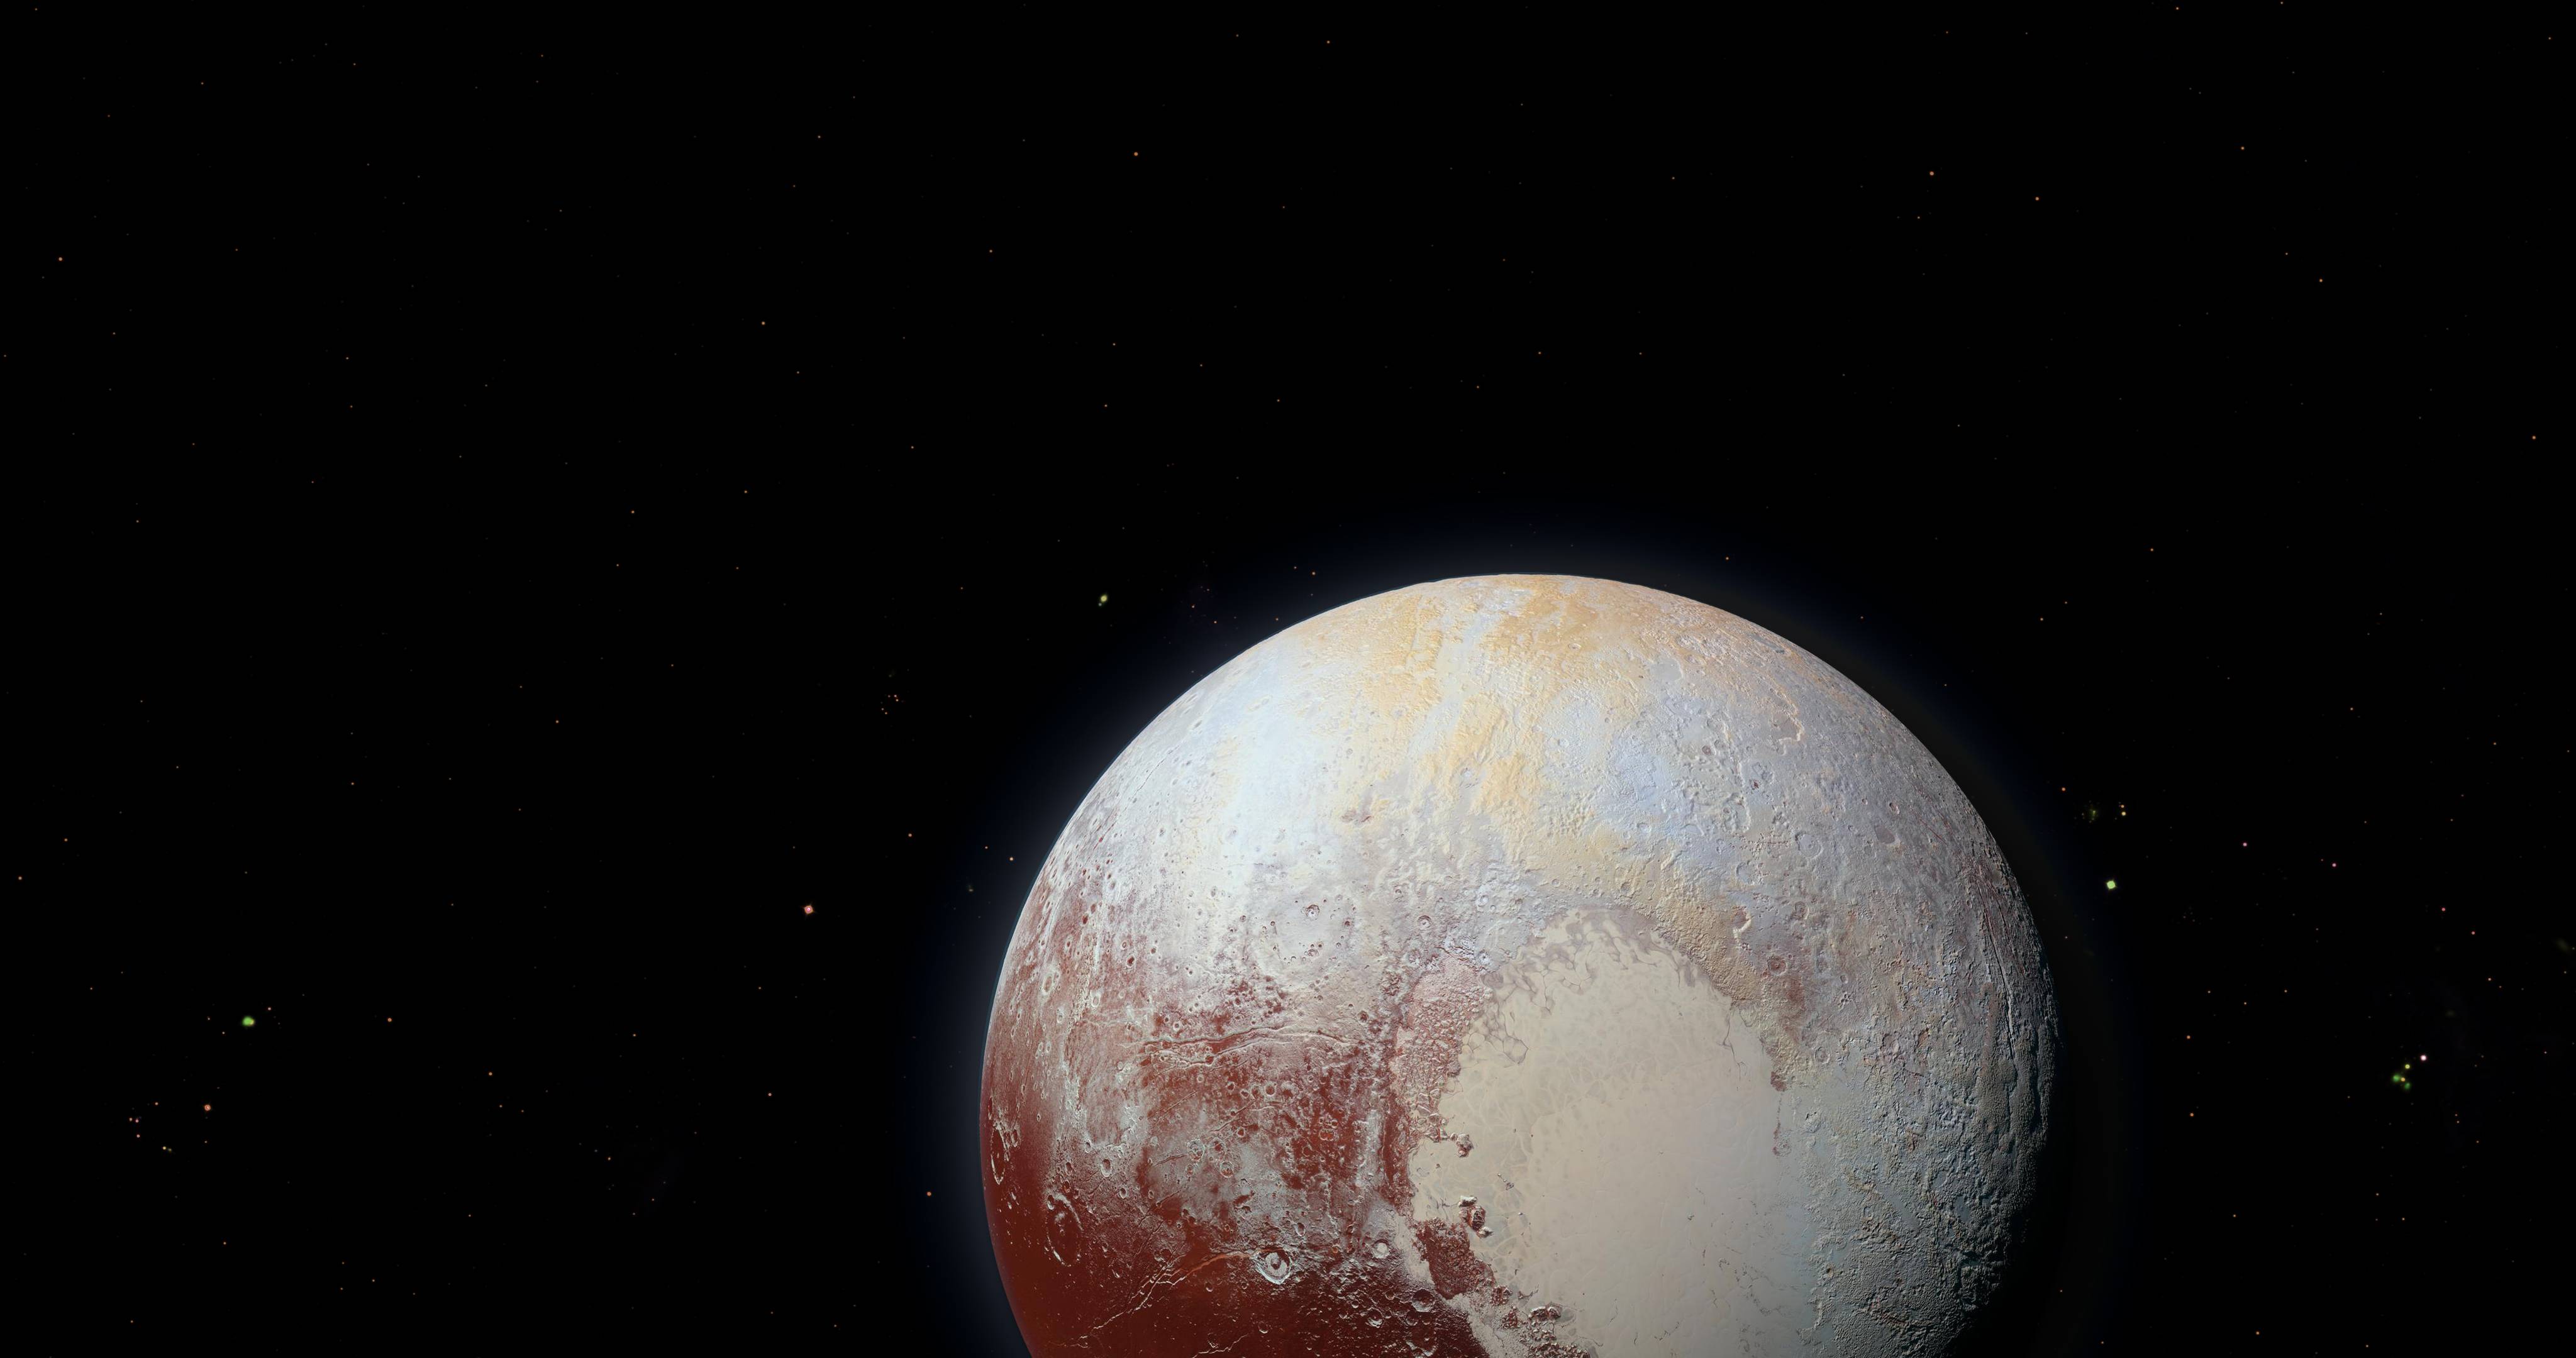 4096x2160] Pluto In All Of Its Glory [OC] R Wallpaper